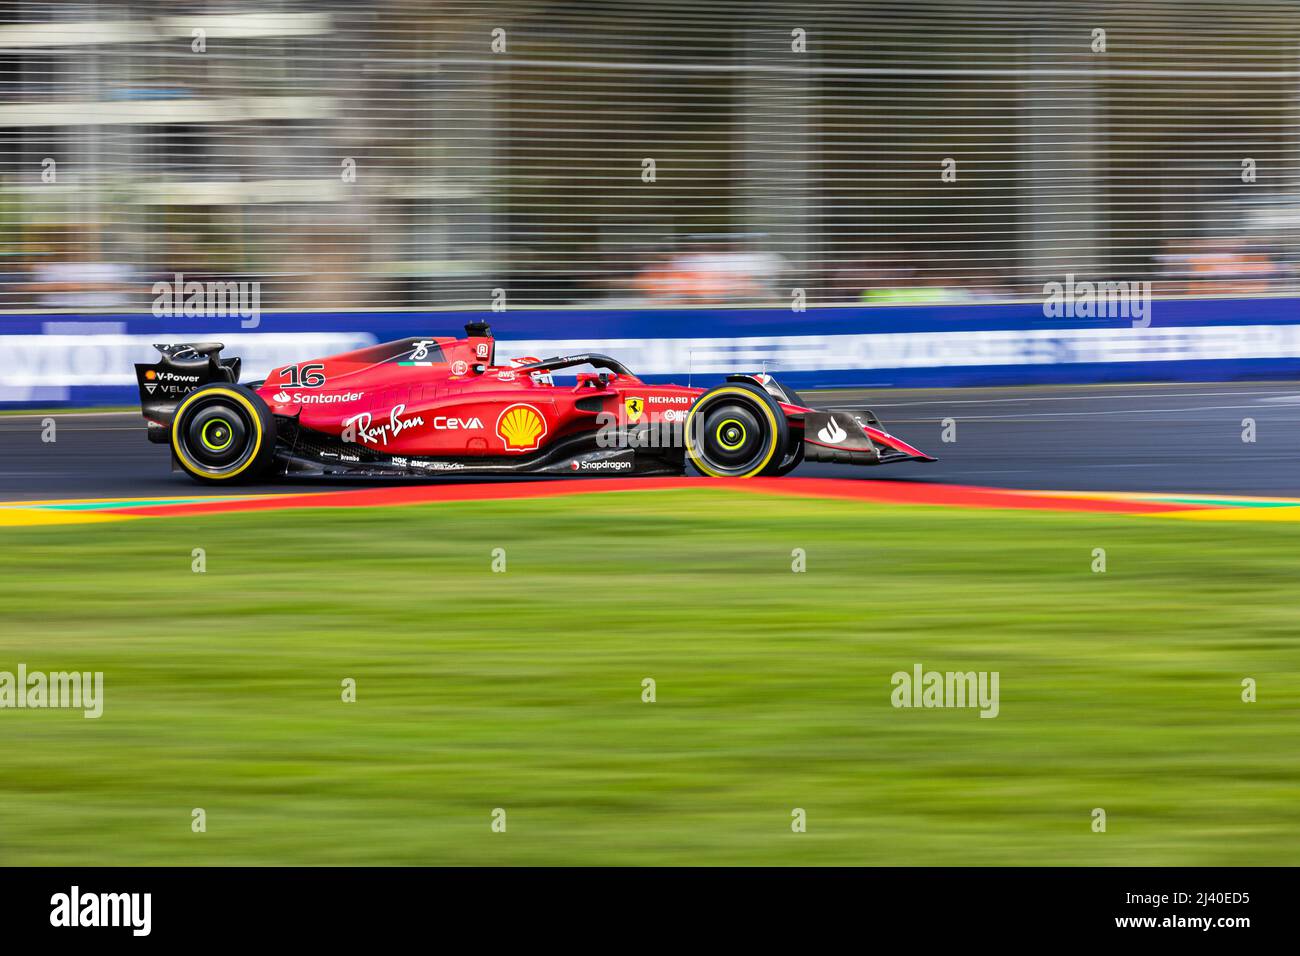 Melbourne, Australia. 10th Apr, 2022. Charles Leclerc of Monaco drives the number 16 Ferrari F1-75 during the 2022 Australian Grand Prix at the Albert Park Grand Prix circuit. Credit: SOPA Images Limited/Alamy Live News Stock Photo